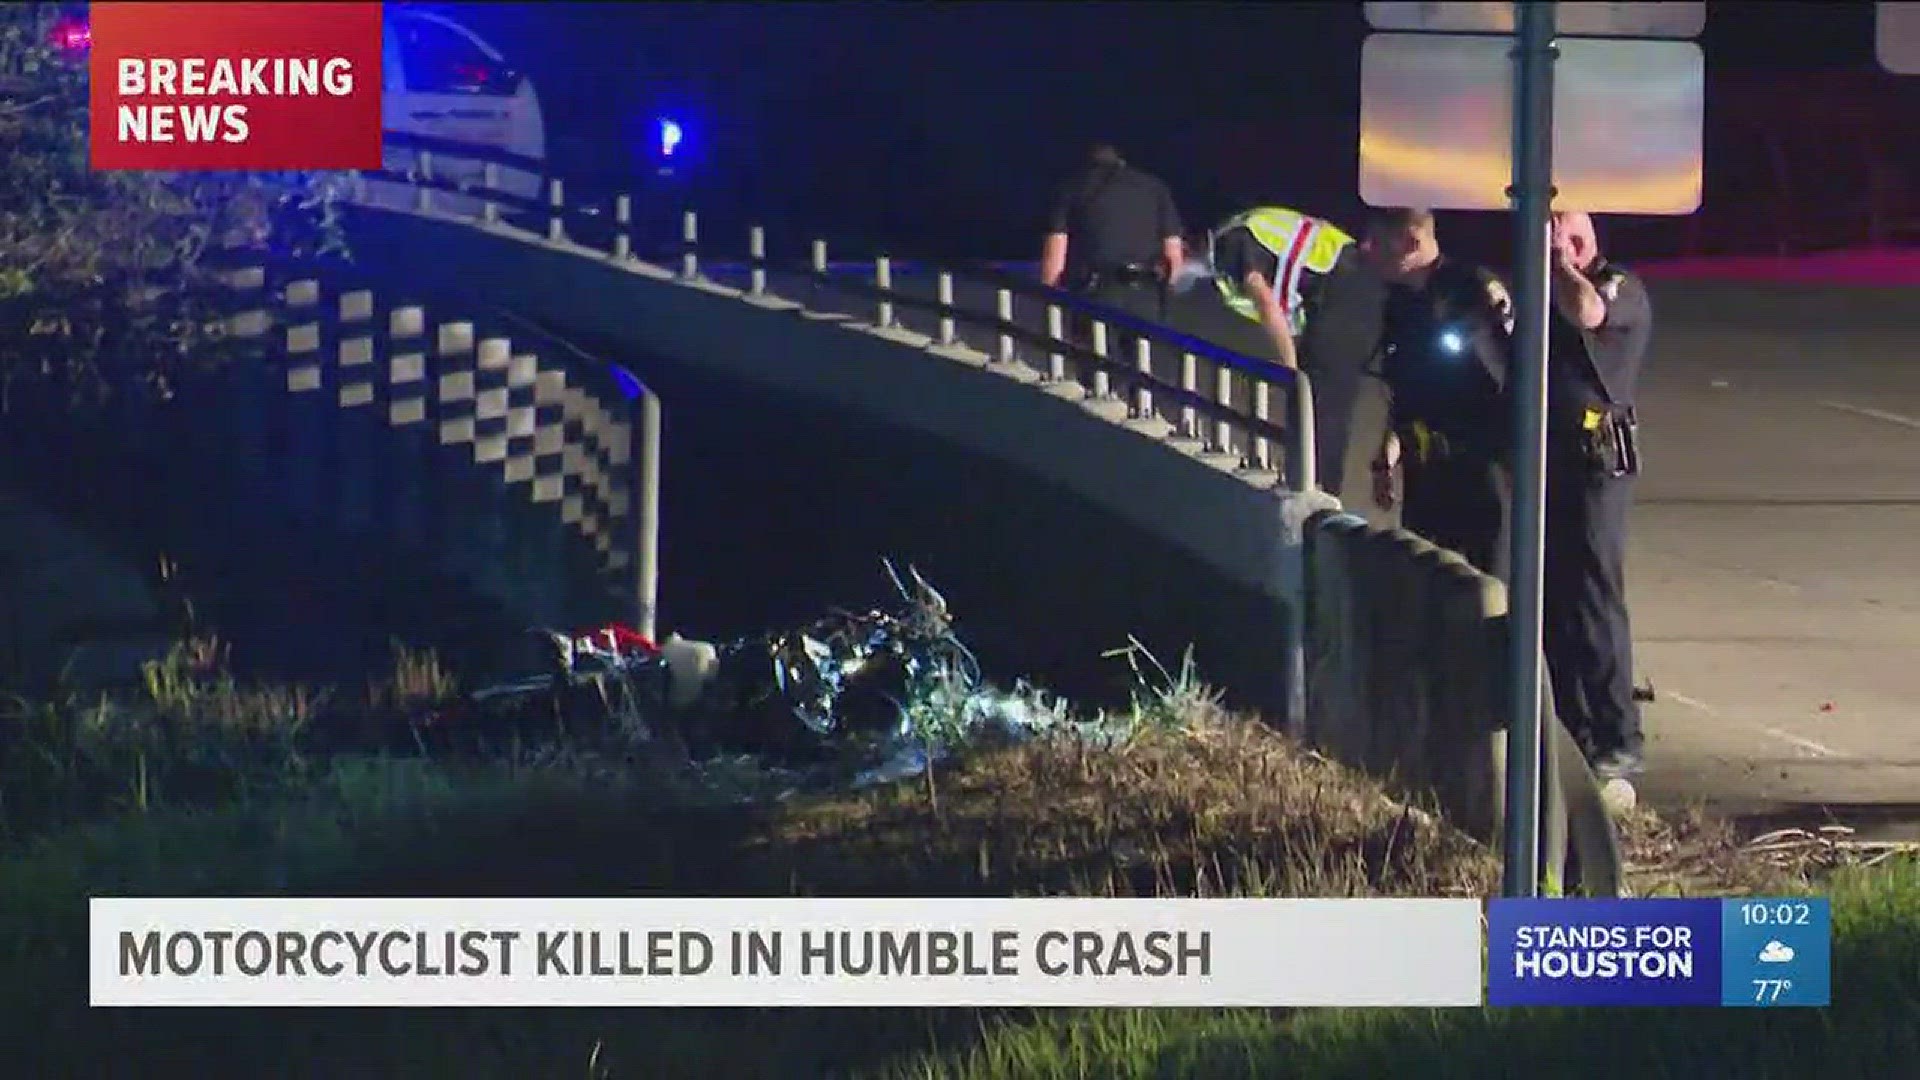 Police are investigating after a motorcyclist was killed Friday night in Humble.